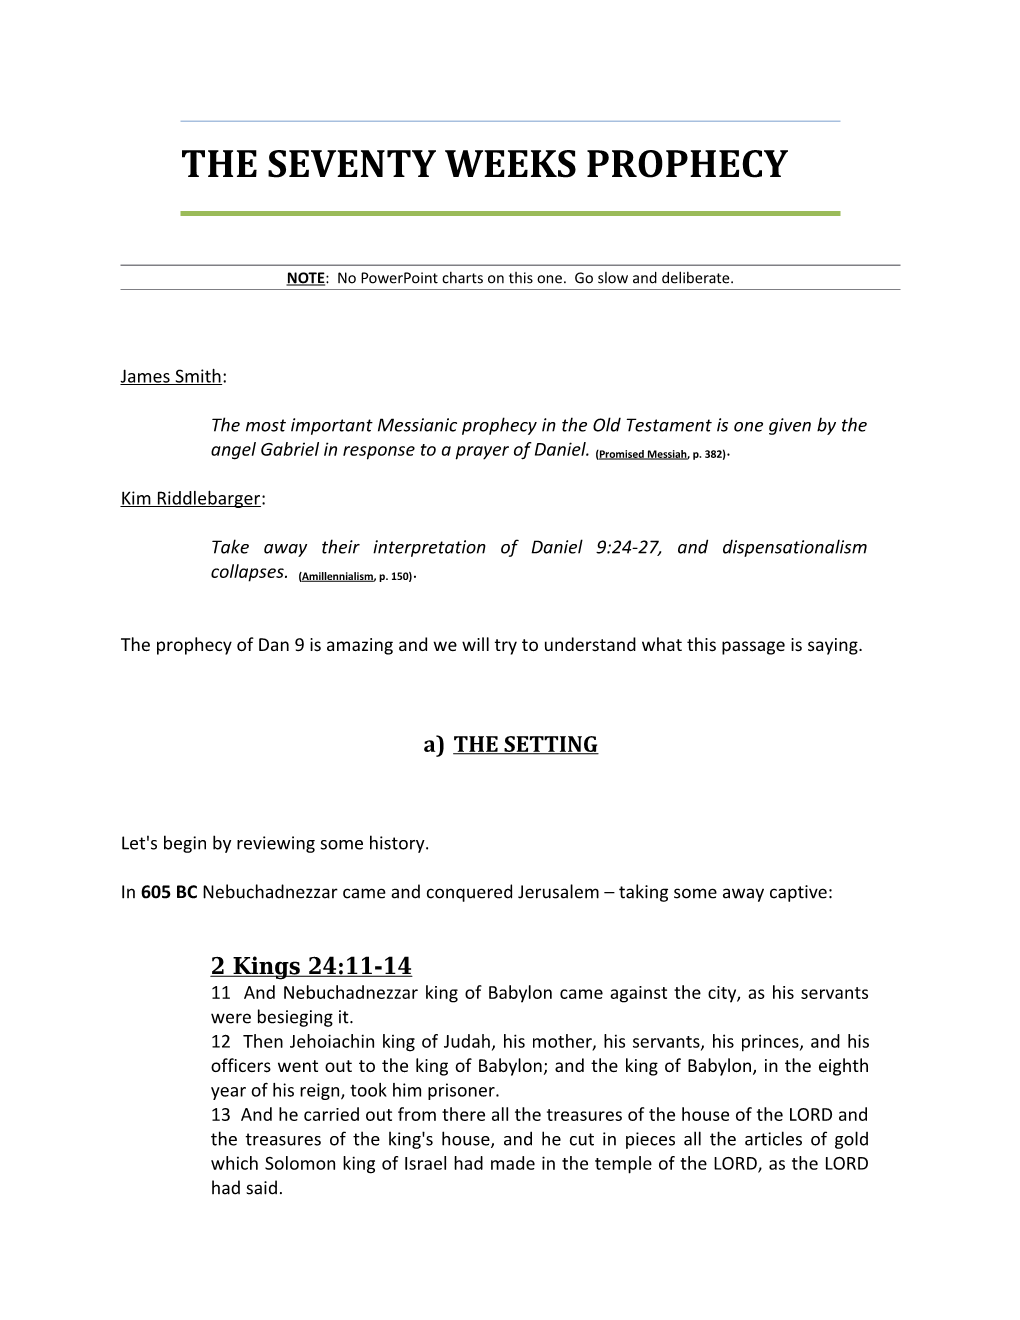 The Seventy Weeks Prophecy